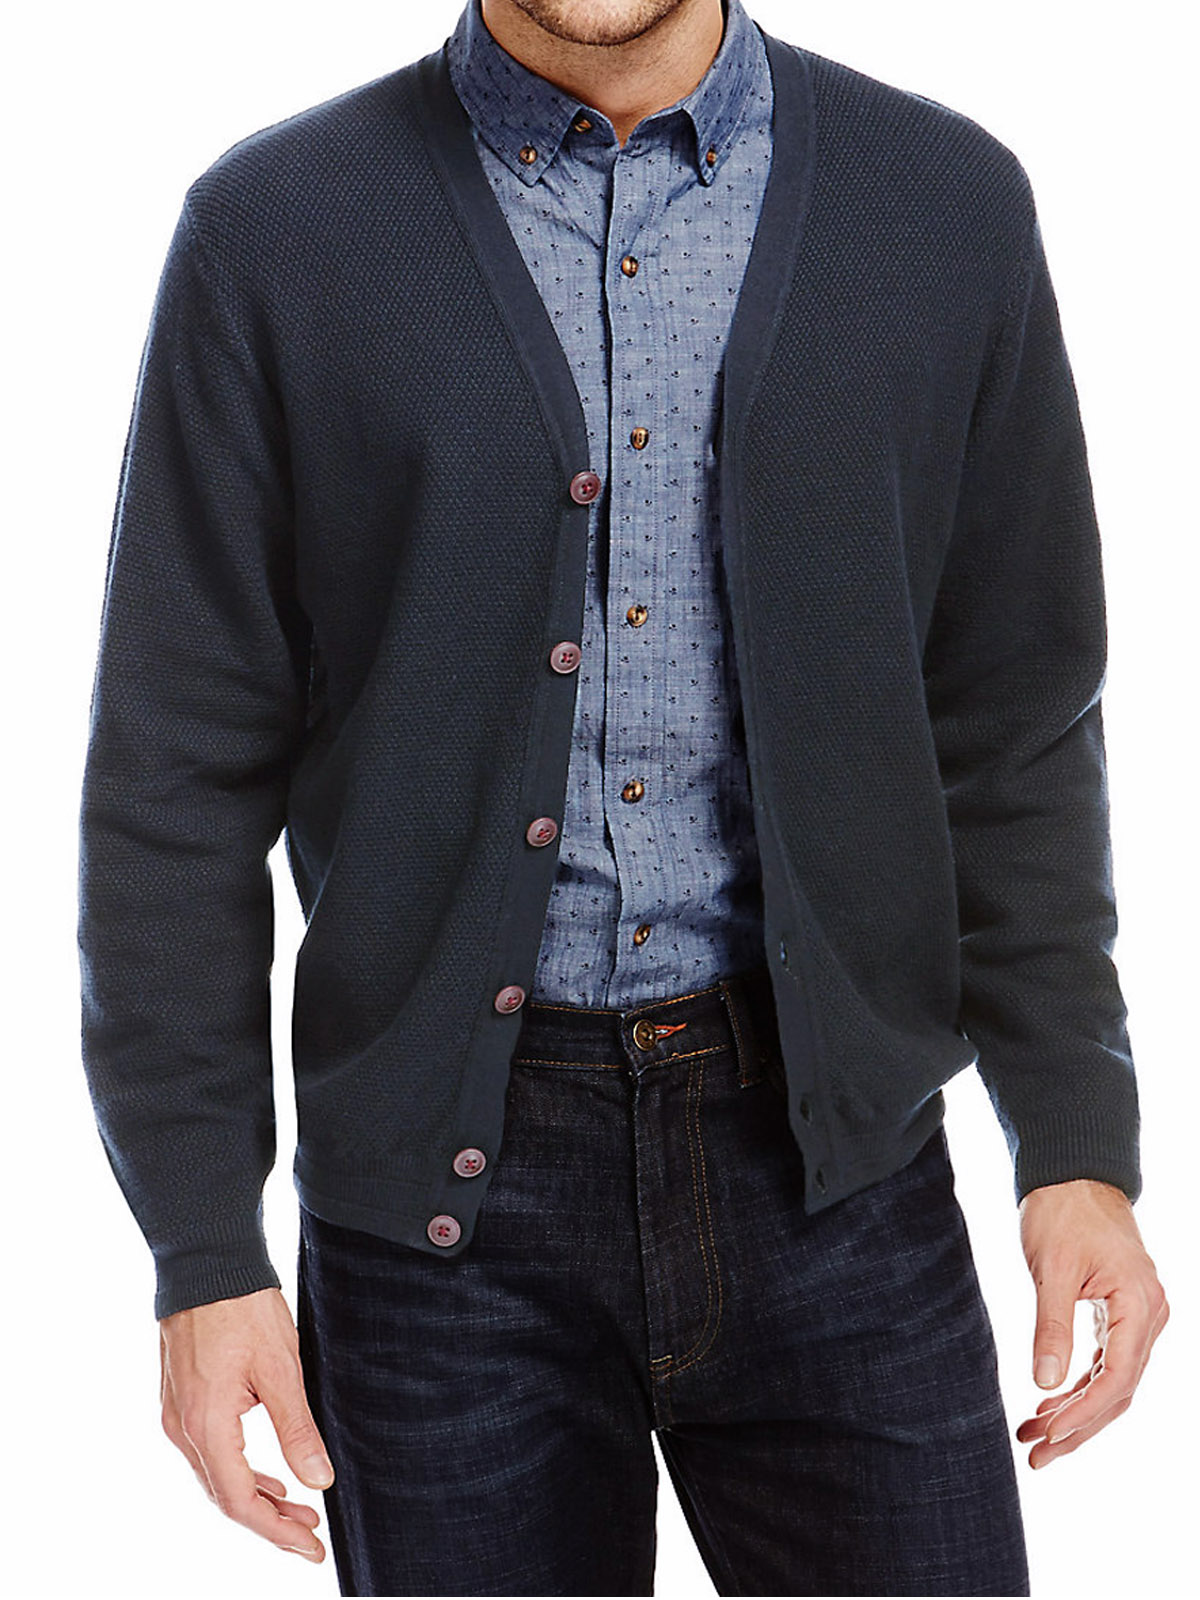 Marks and Spencer - - M&5 Navy Pure Cotton Piqué Textured Cardigan ...